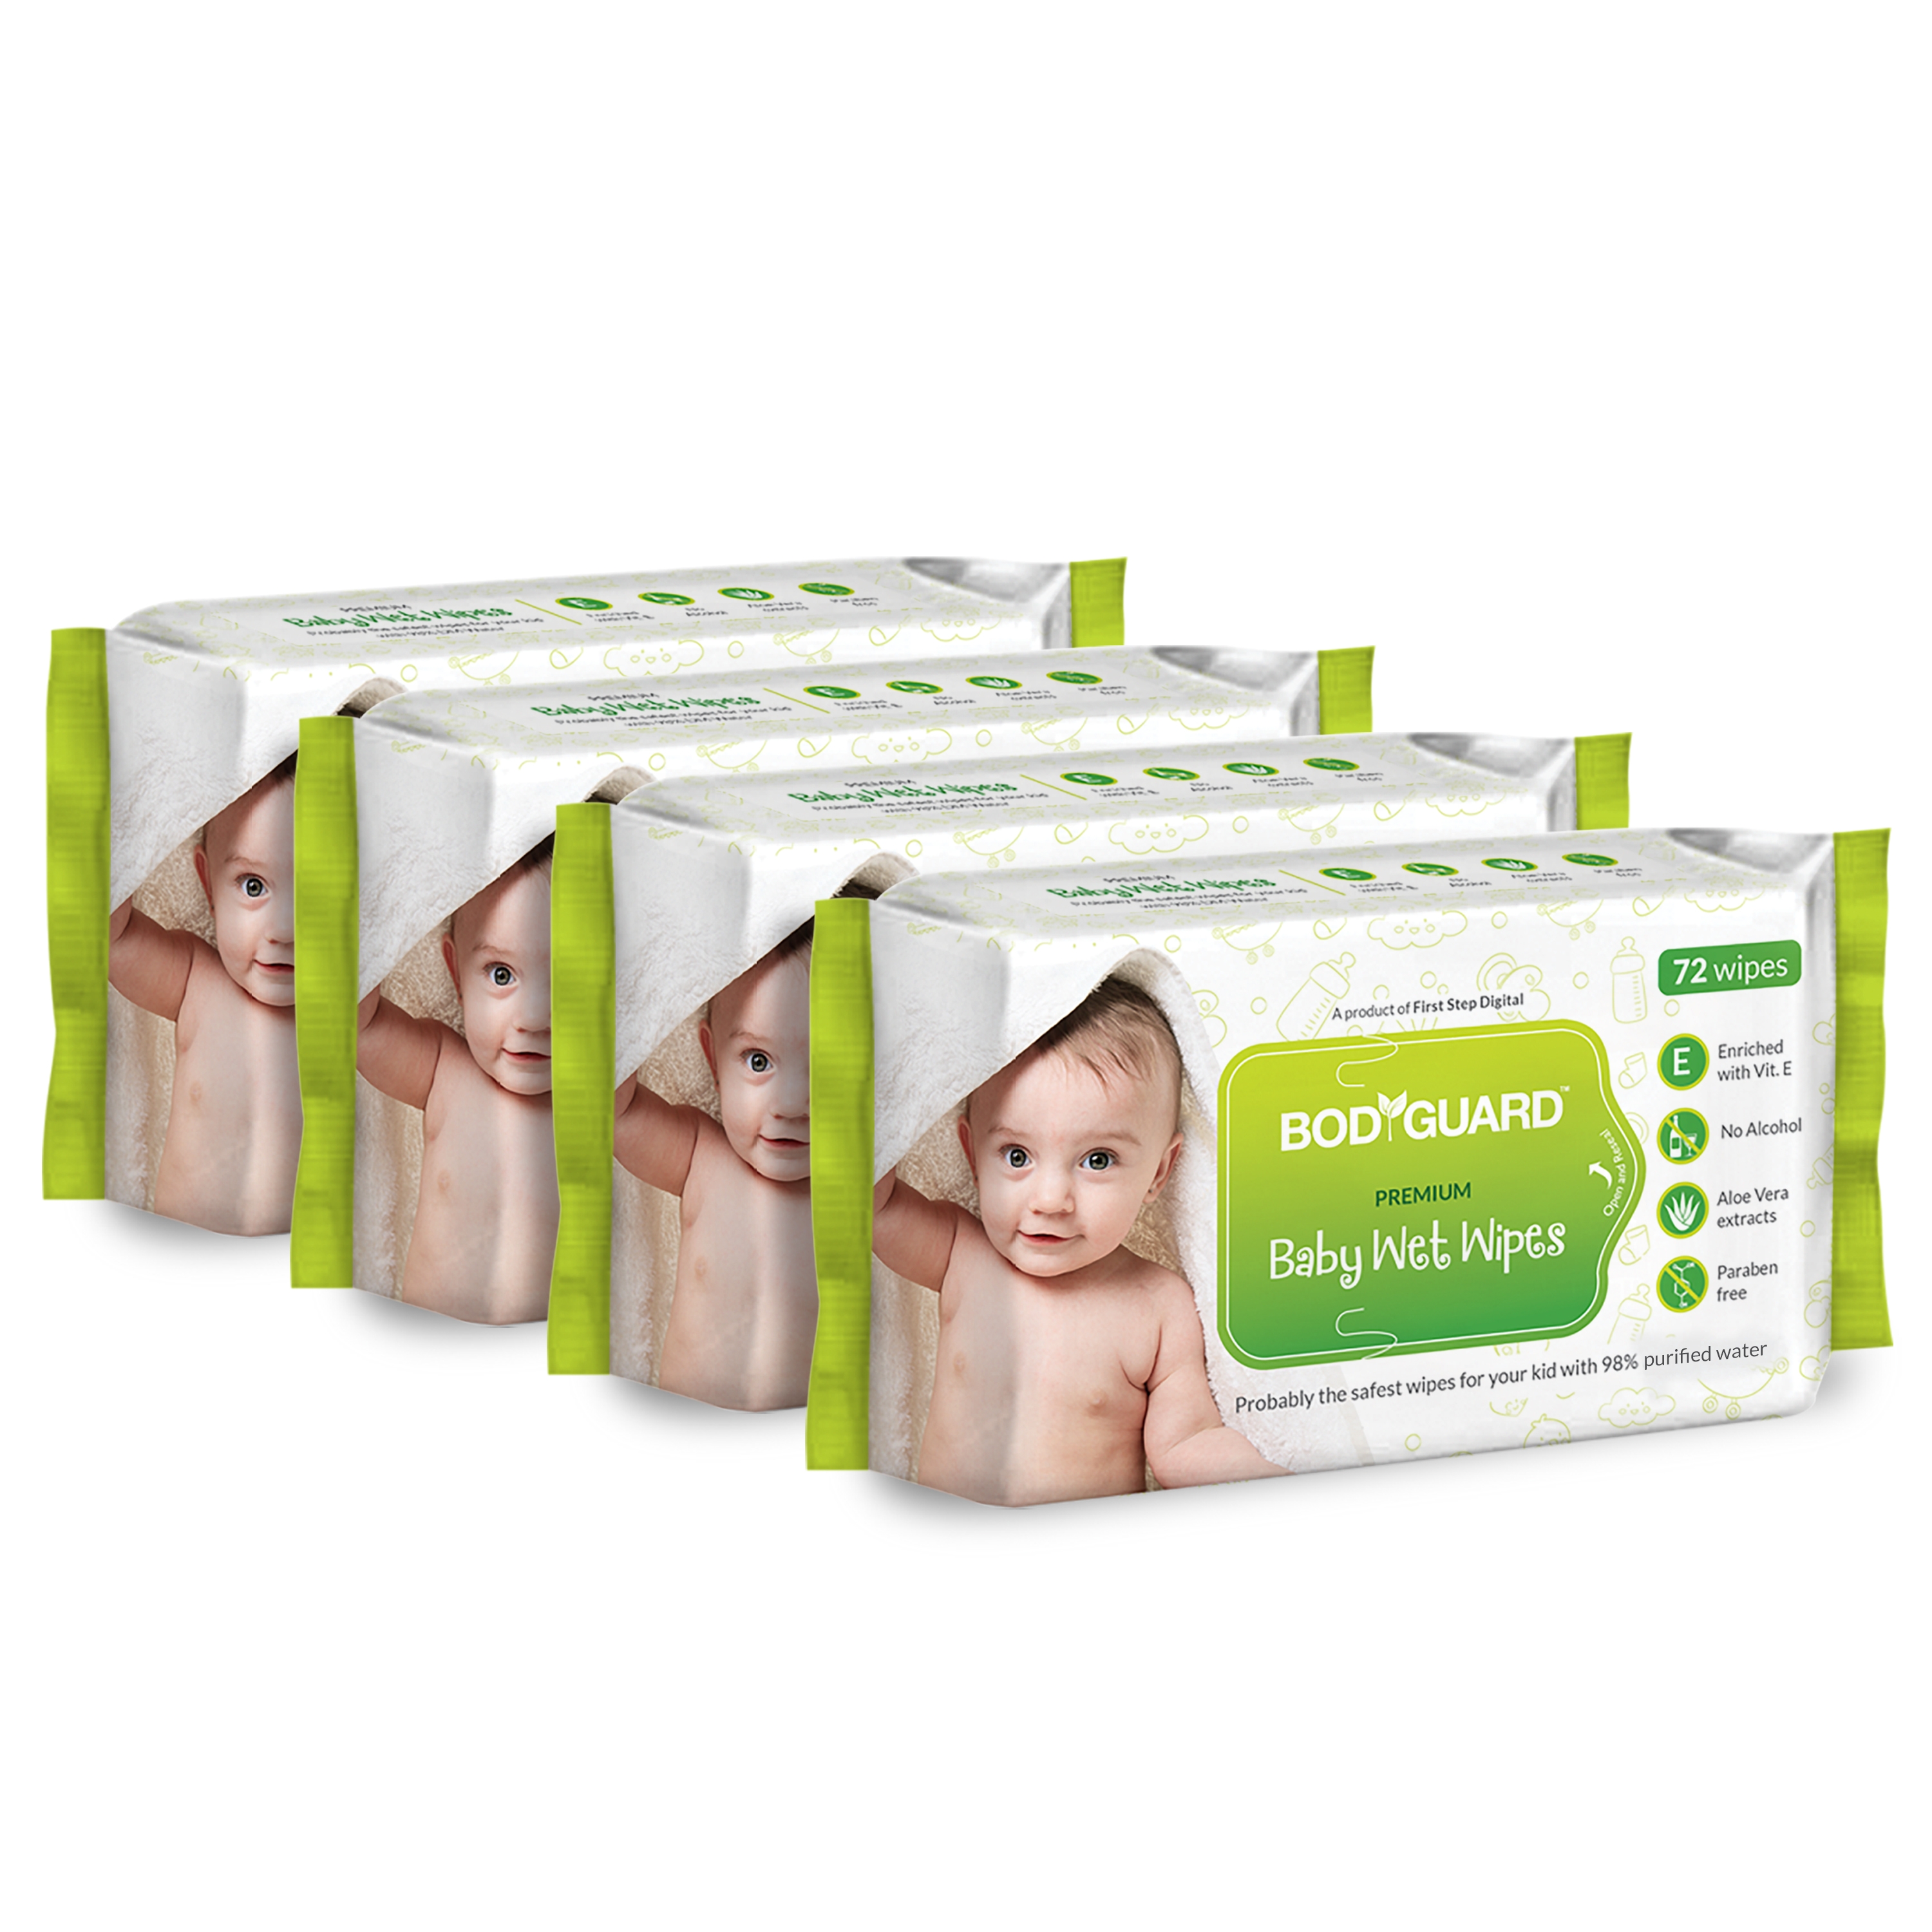 Bodyguard | Bodyguard Premium Paraben Free Baby Wet Wipes with Aloe Vera - 288 Wipes (4 Pack, 72 each)